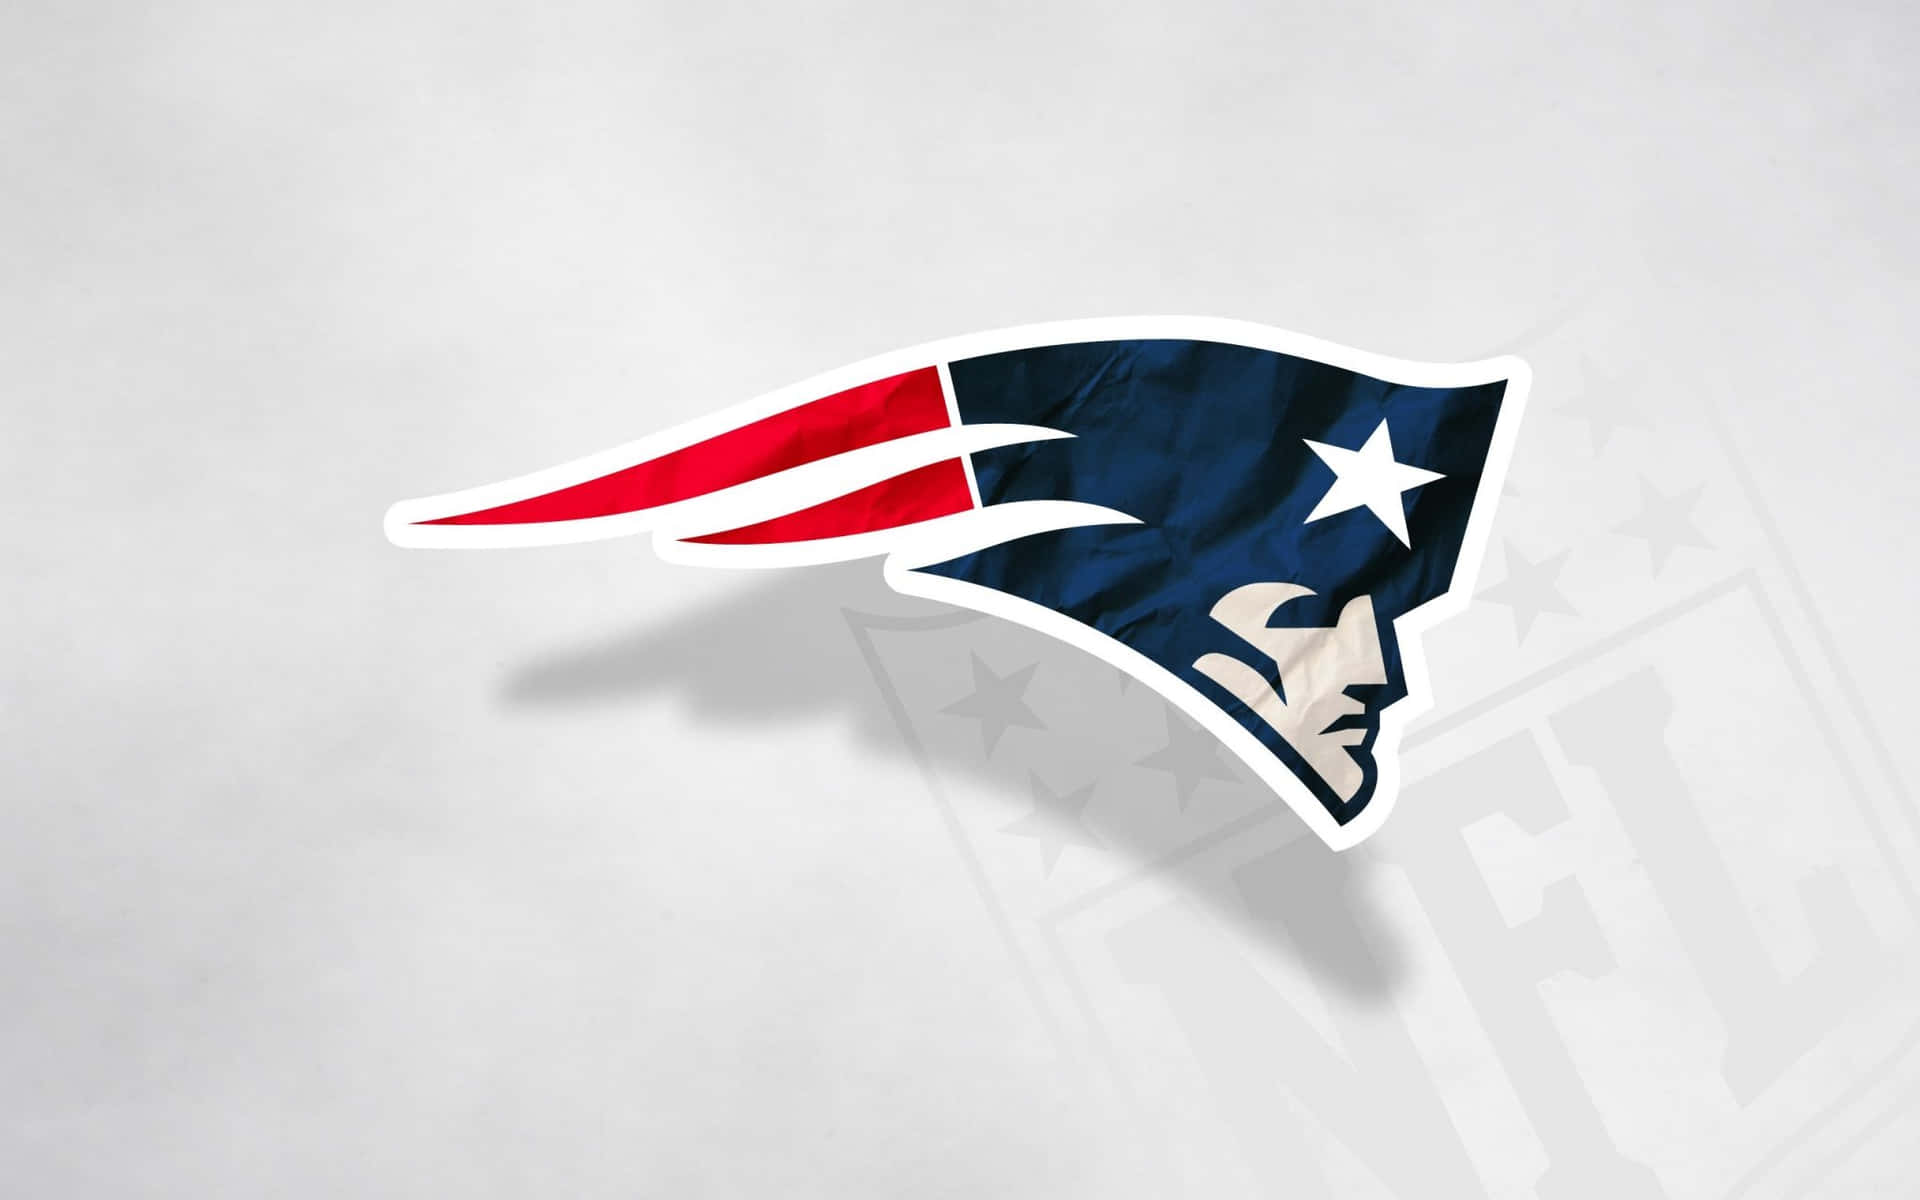 Let's All Get Behind The Patriots, Proudly Show Your Team Spirit With This Vibrant Desktop Wallpaper. Background